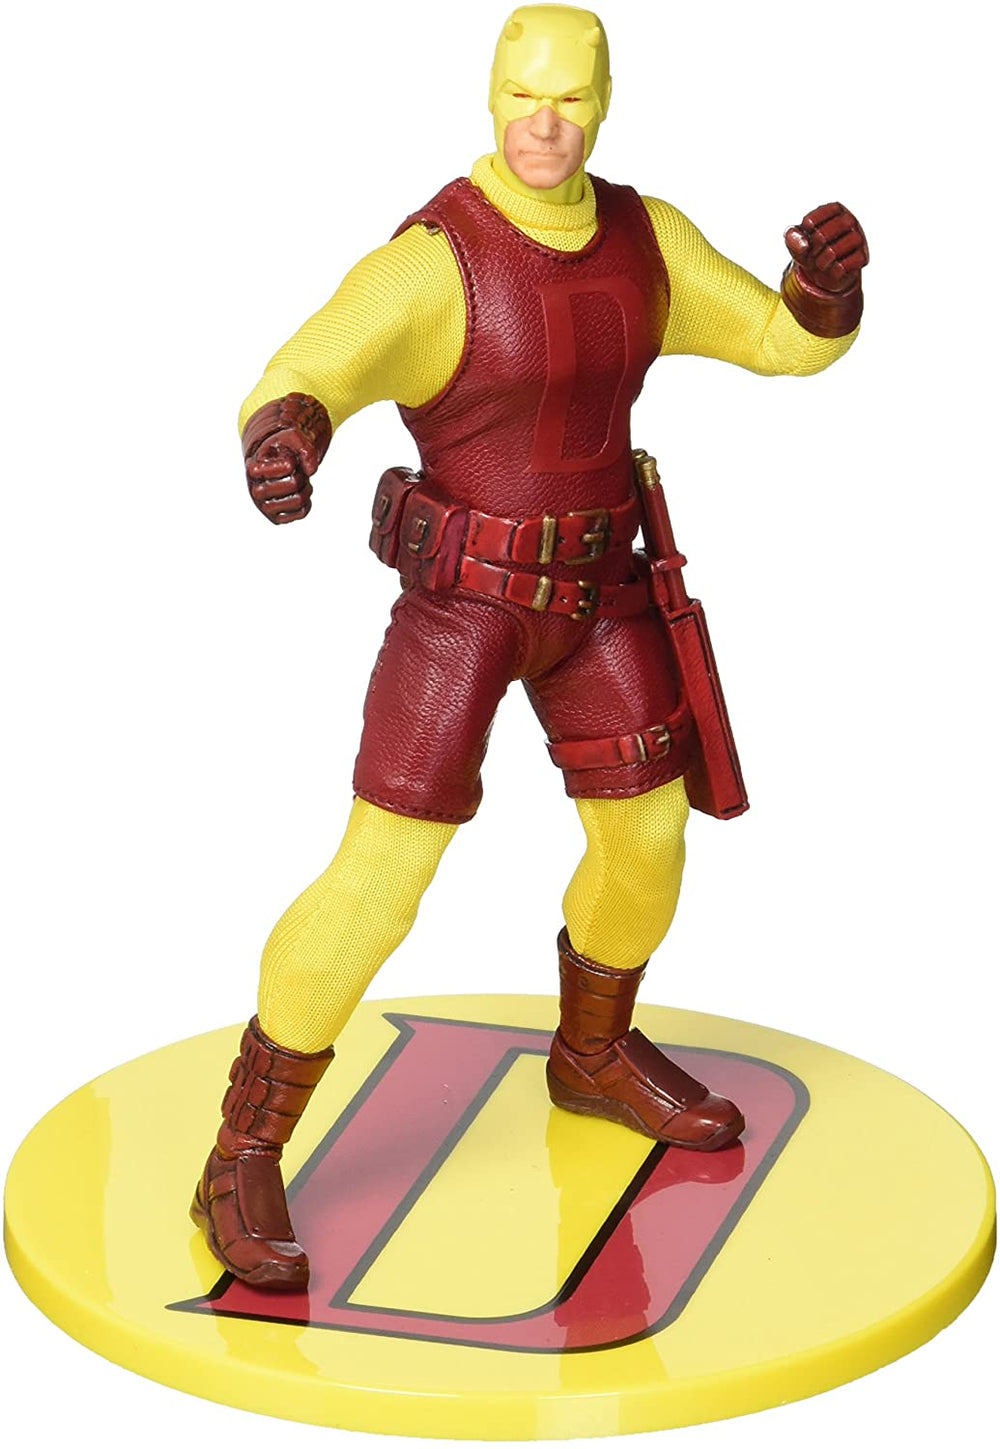 ONE-12 COLLECTIVE MARVEL PX YELLOW DAREDEVIL ACTION FIGURE